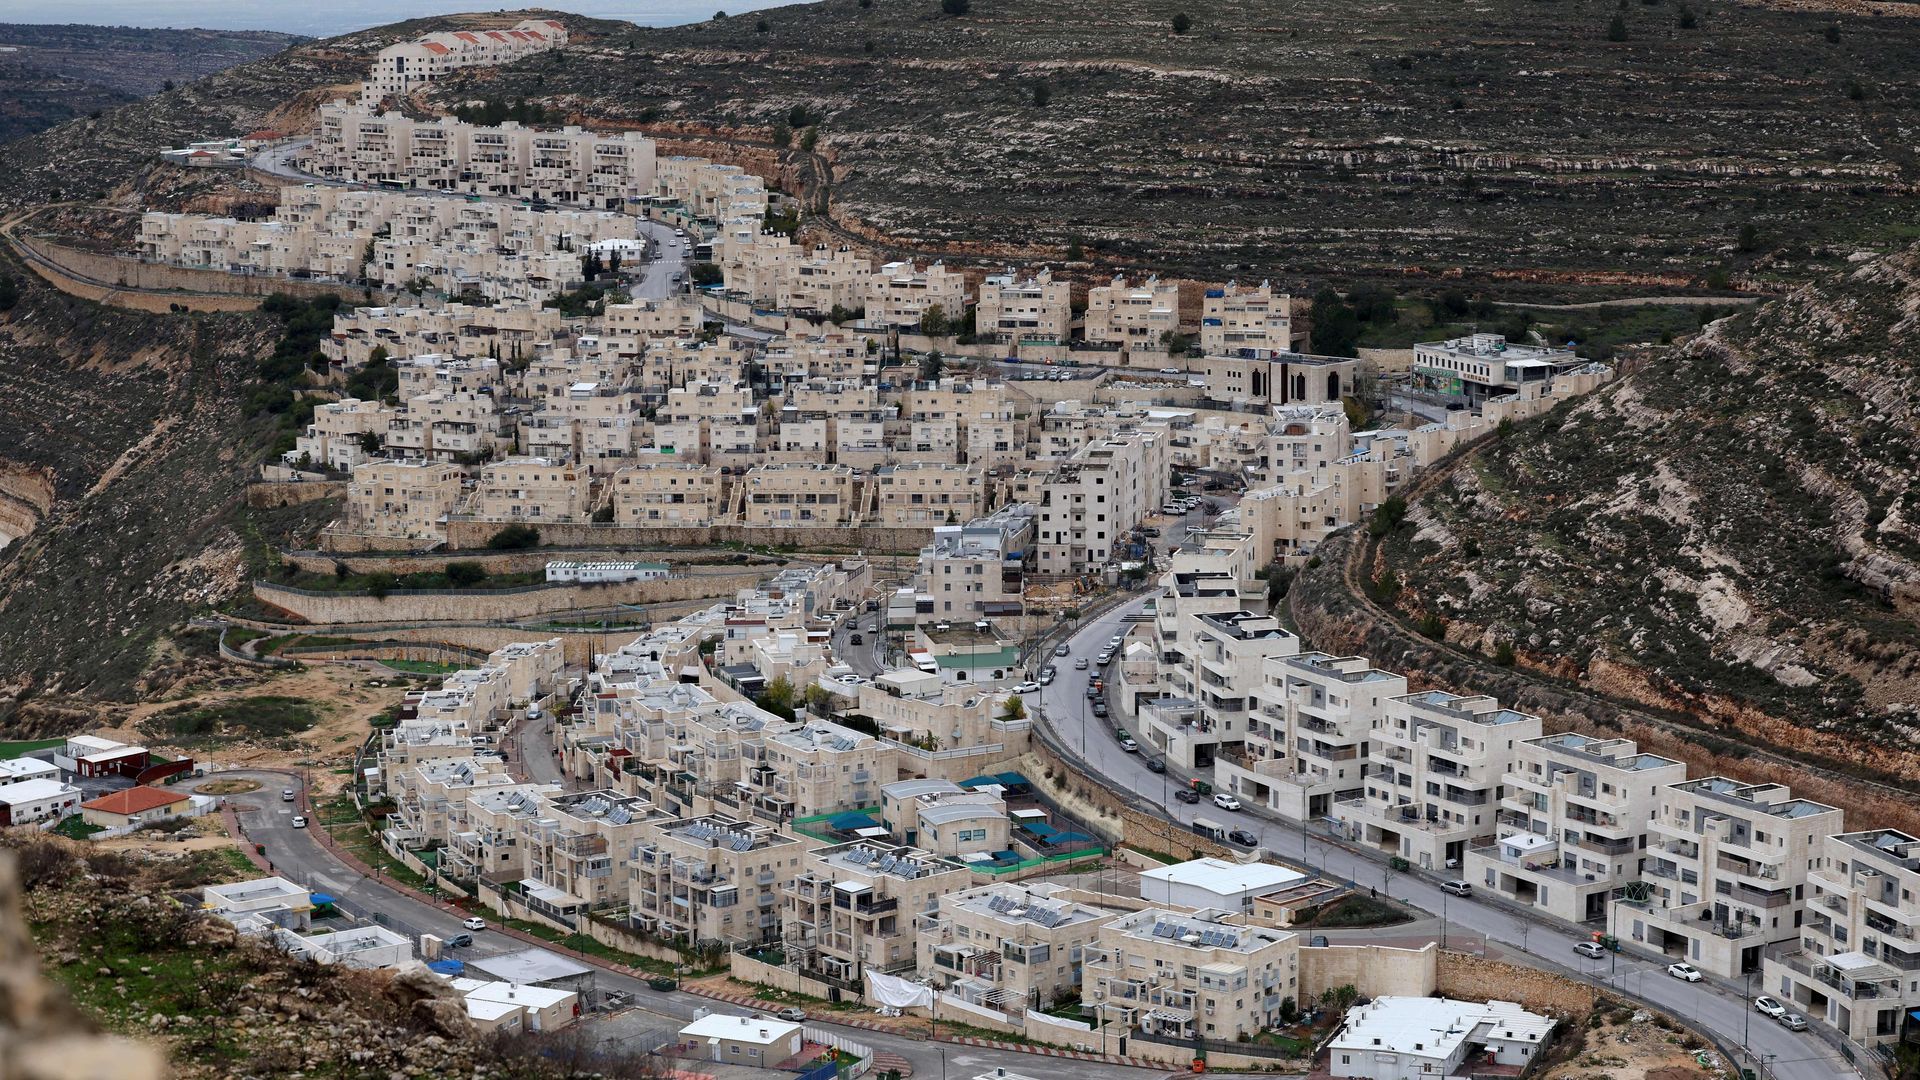 A picture shows a general view of the Israeli settlement of Givat Zeev, near the Palestinian city of Ramallah in the occupied West Bank, in February. Photo: Ahmad Gharabli/AFP via Getty Images